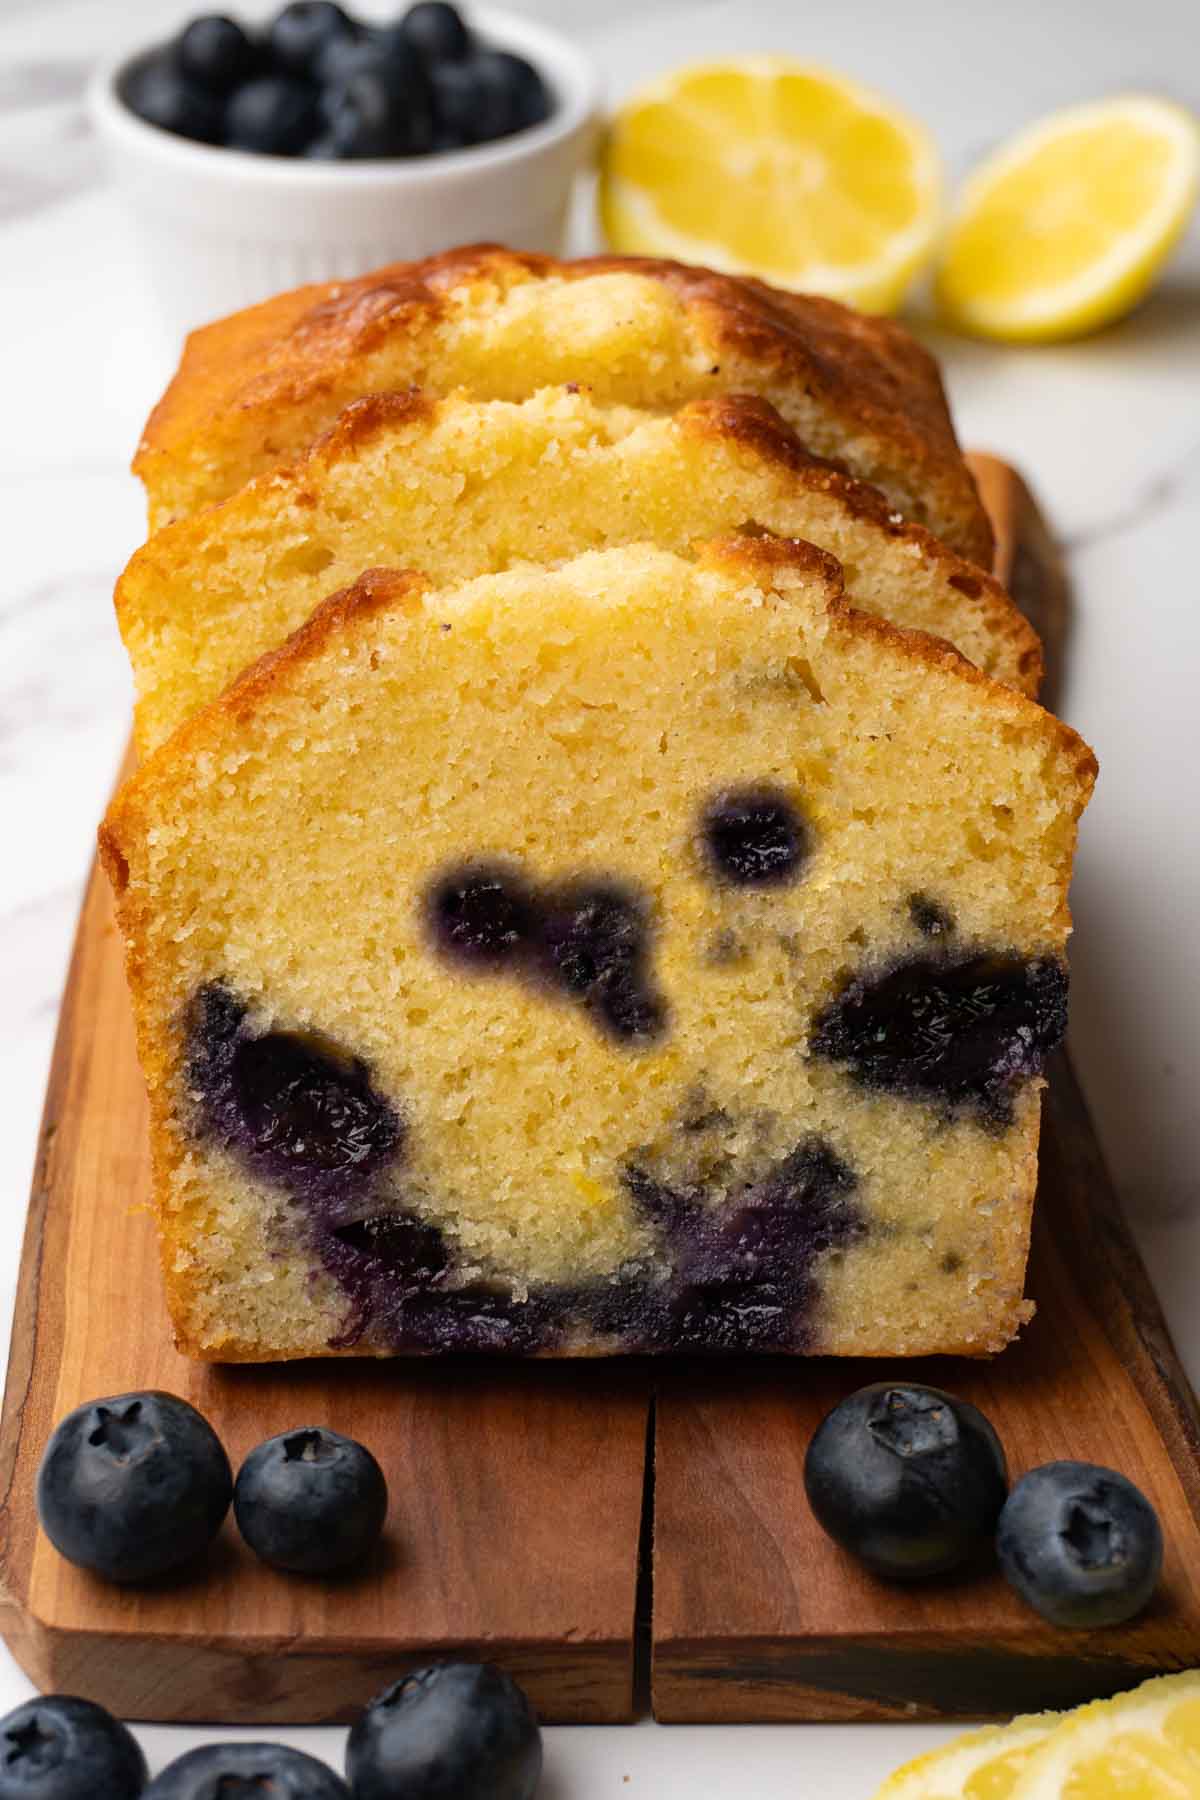 A sliced pound cake with lemon zest and blueberries on a wooden serving boars, fresh blueberries and lemon slices are lying around.